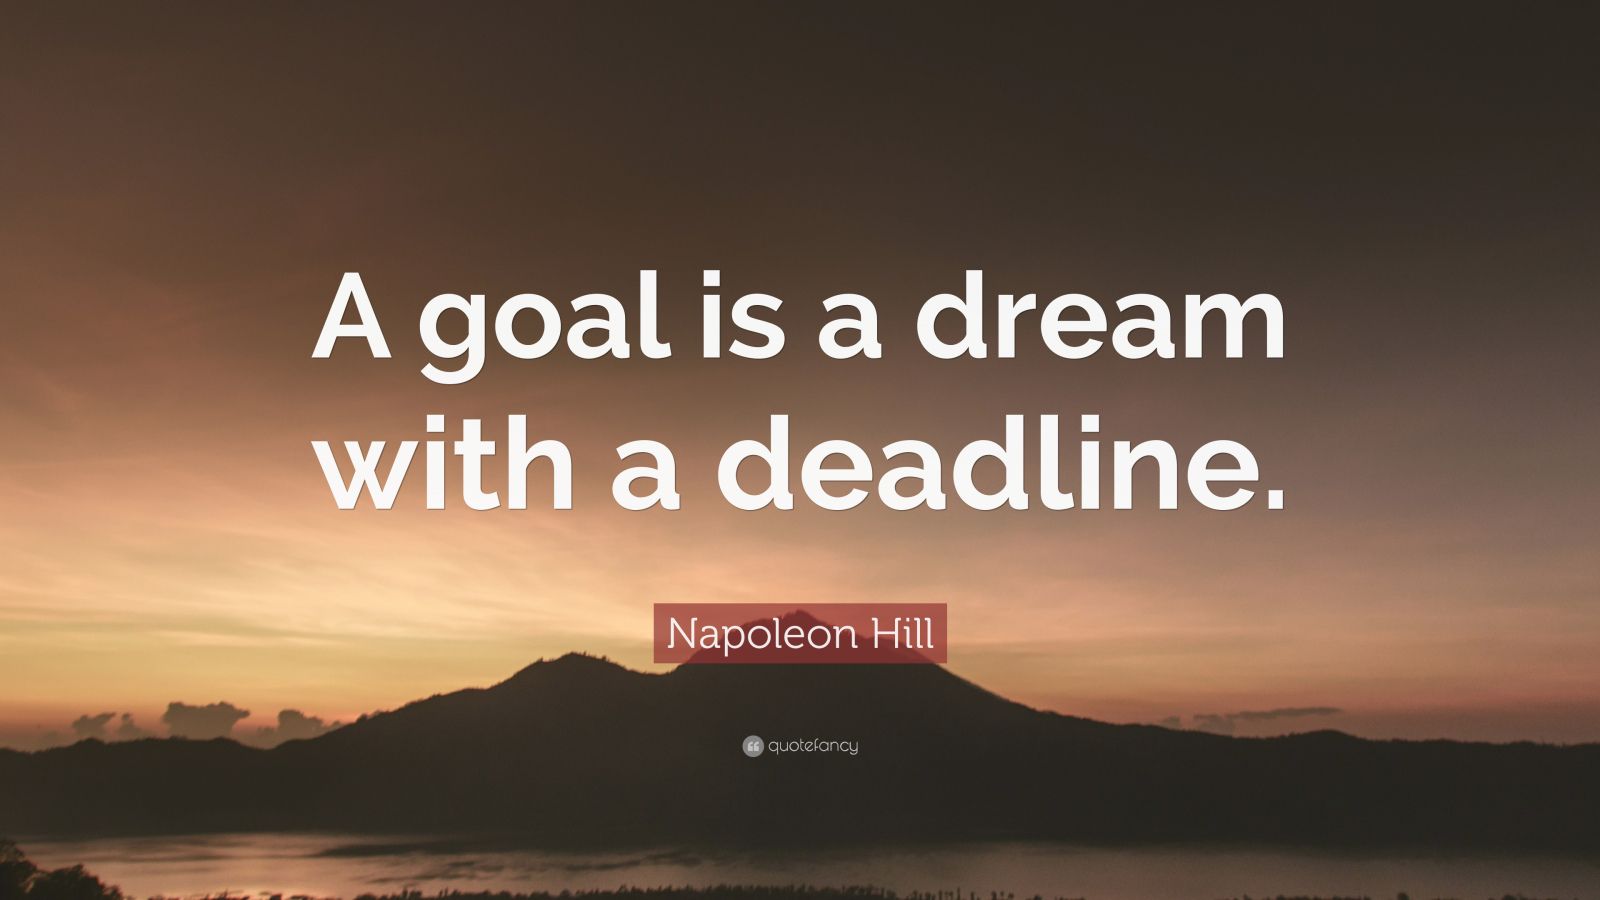 Napoleon Hill Quote “A goal is a dream with a deadline